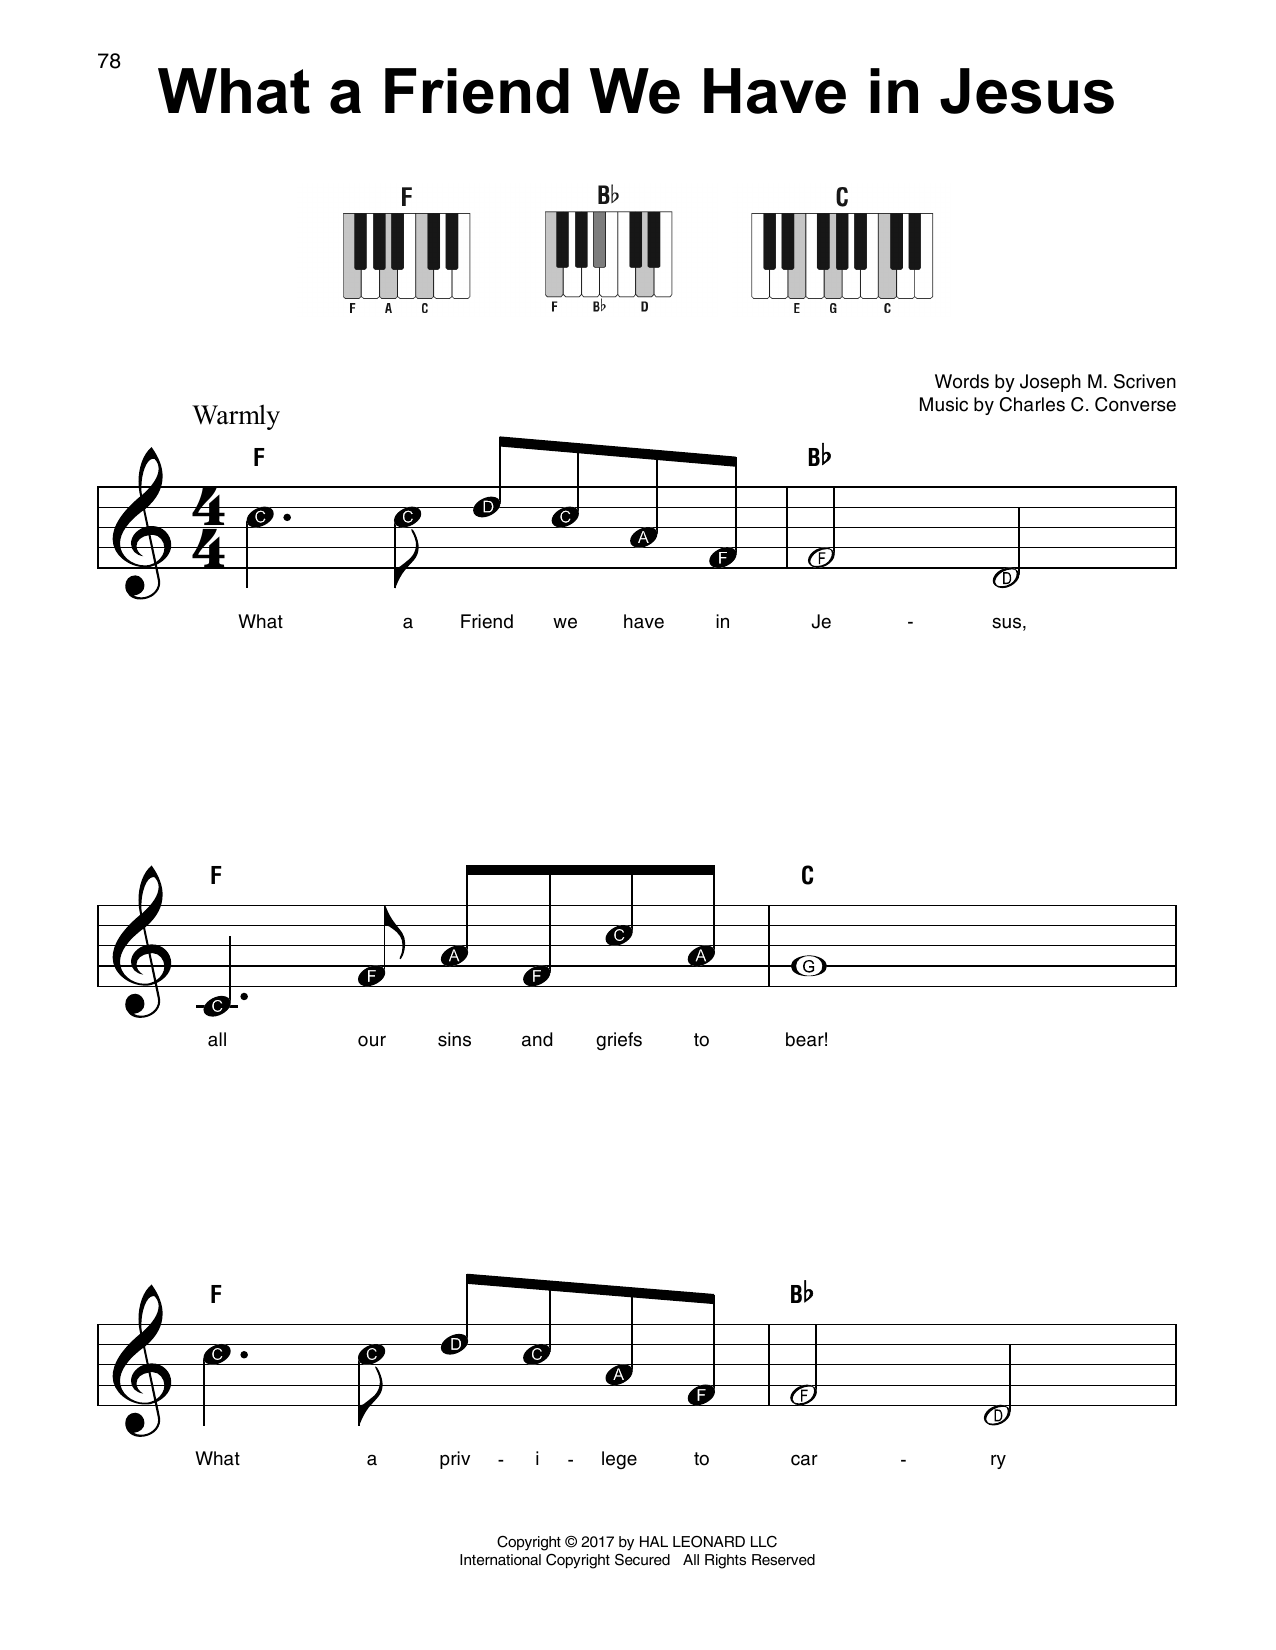 Download Charles C. Converse What A Friend We Have In Jesus Sheet Music